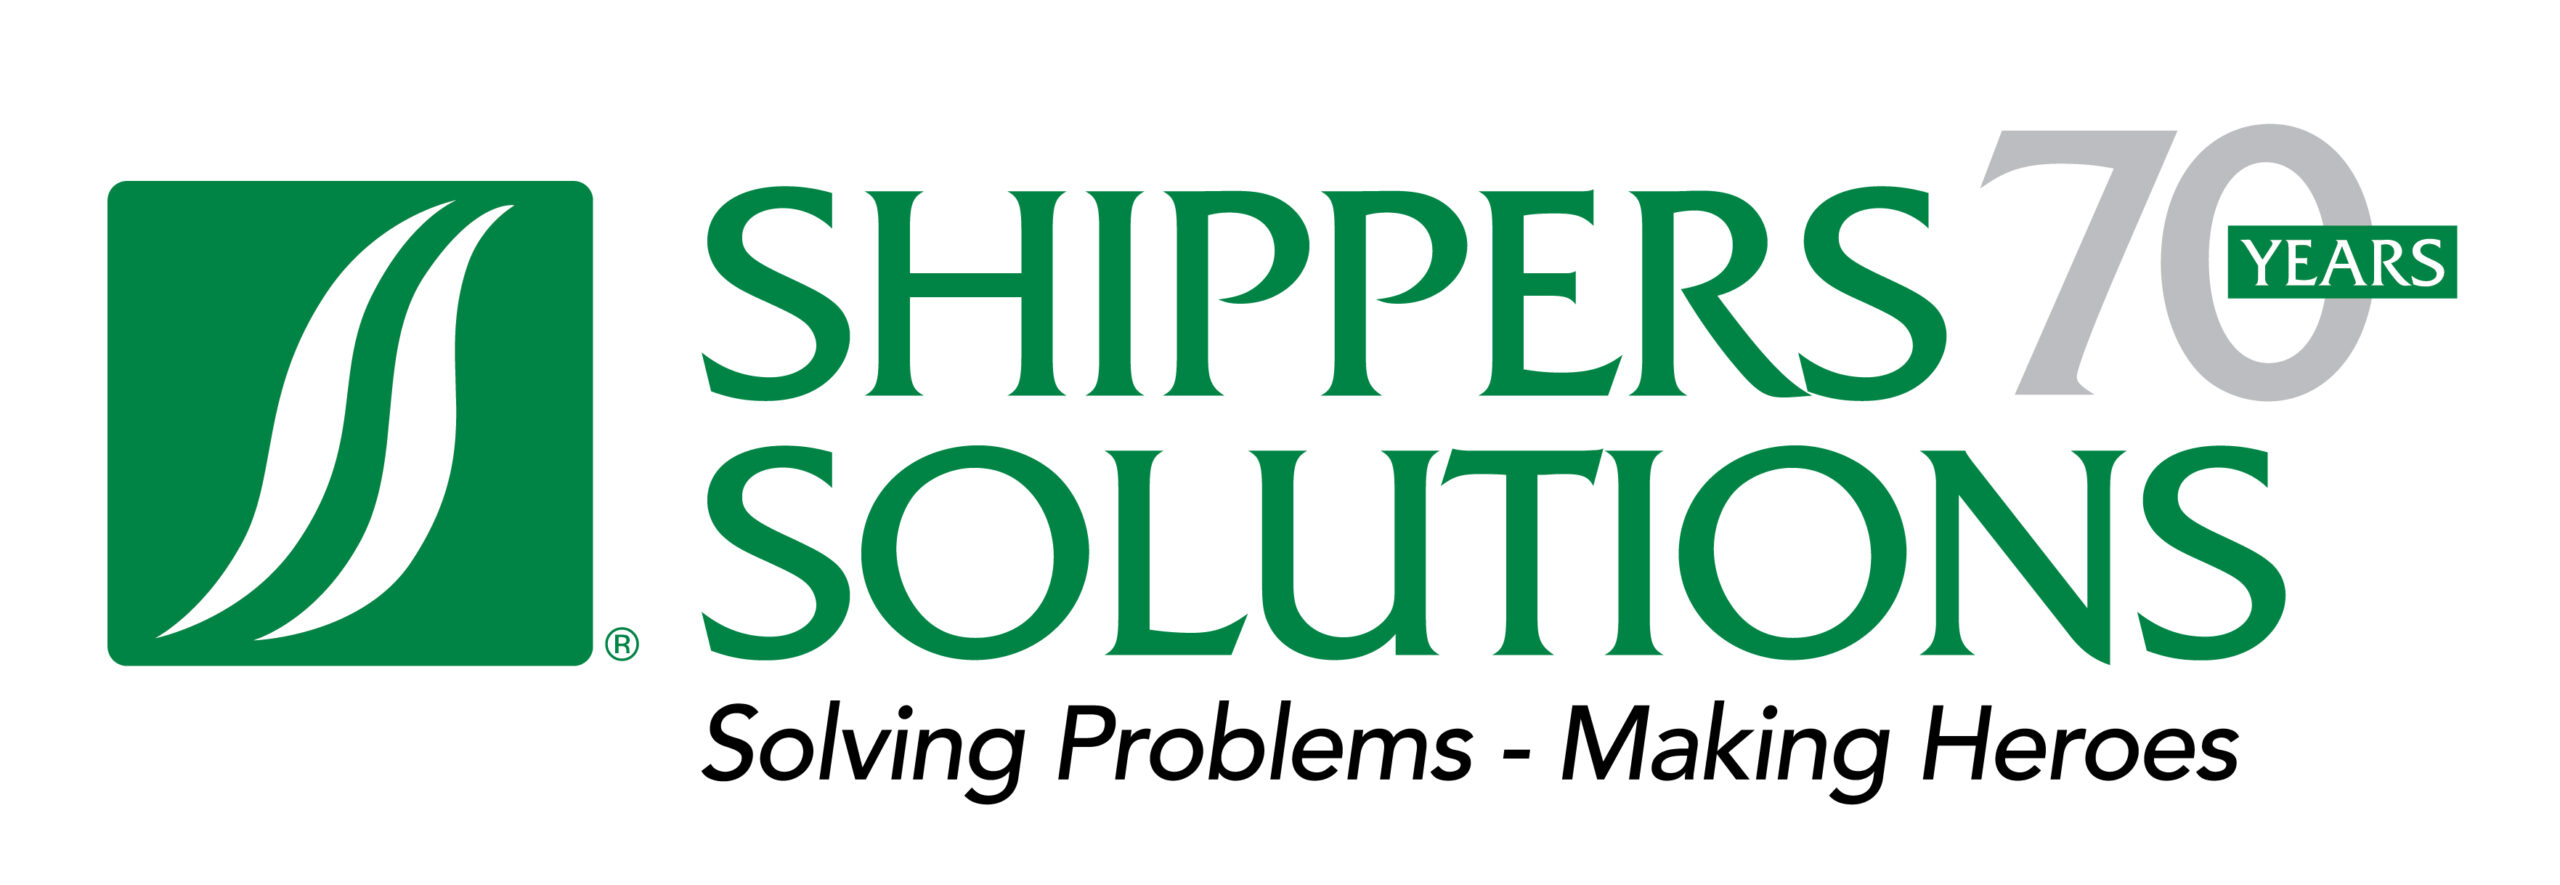 Shippers Solutions